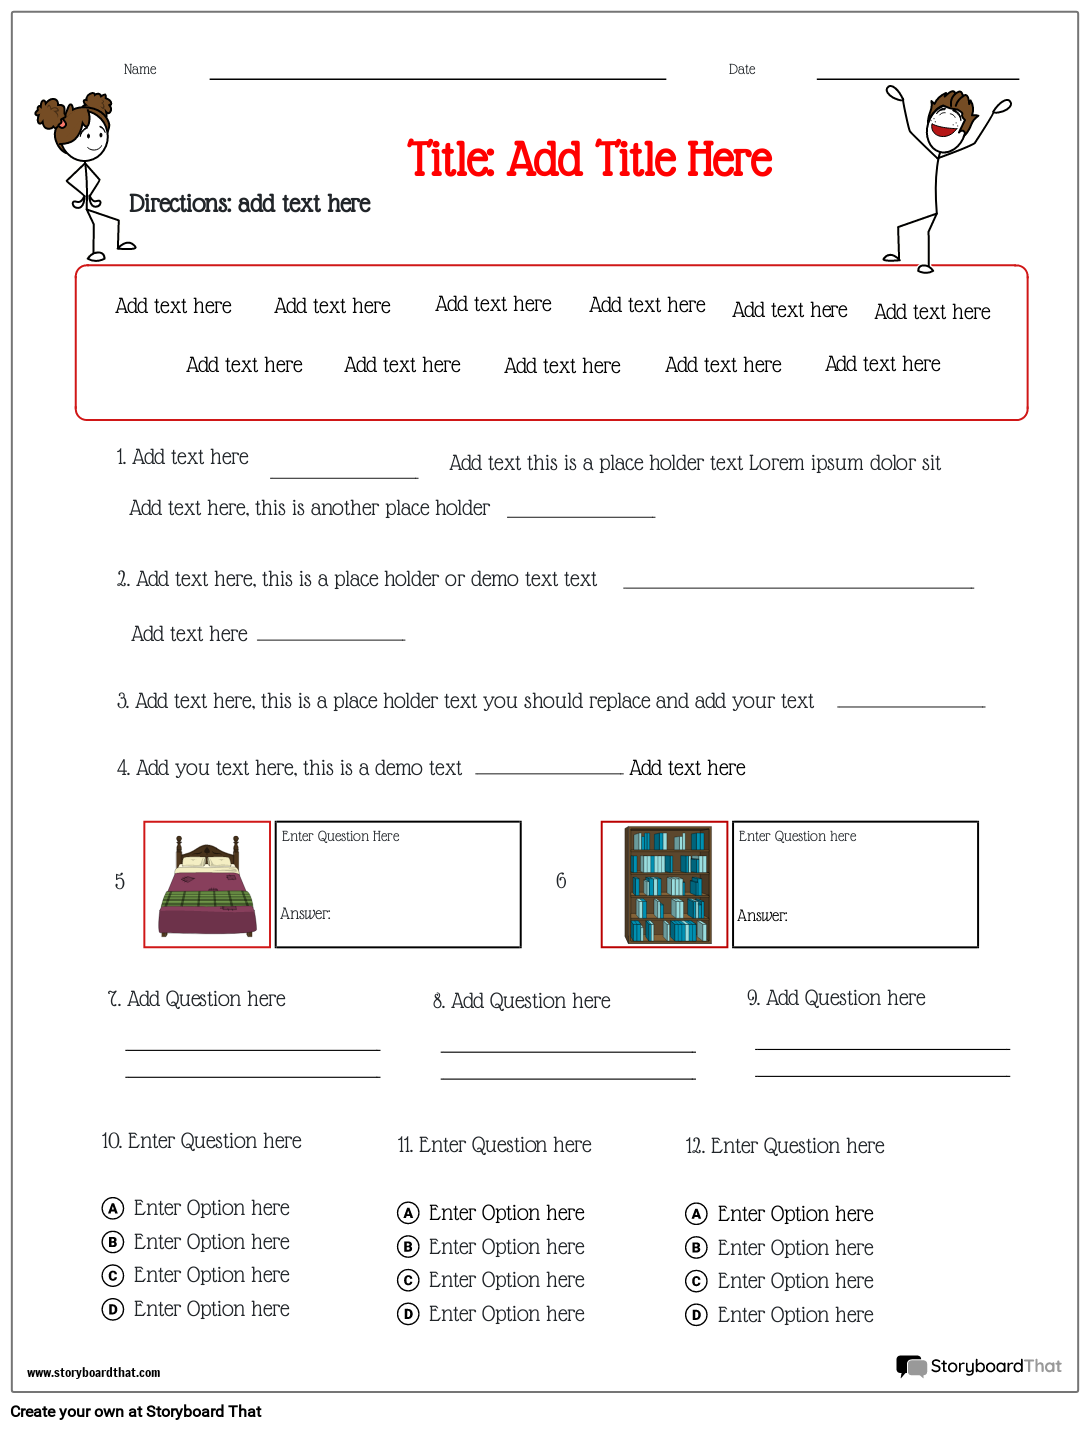 Multi-pattern text and quizzes worksheet